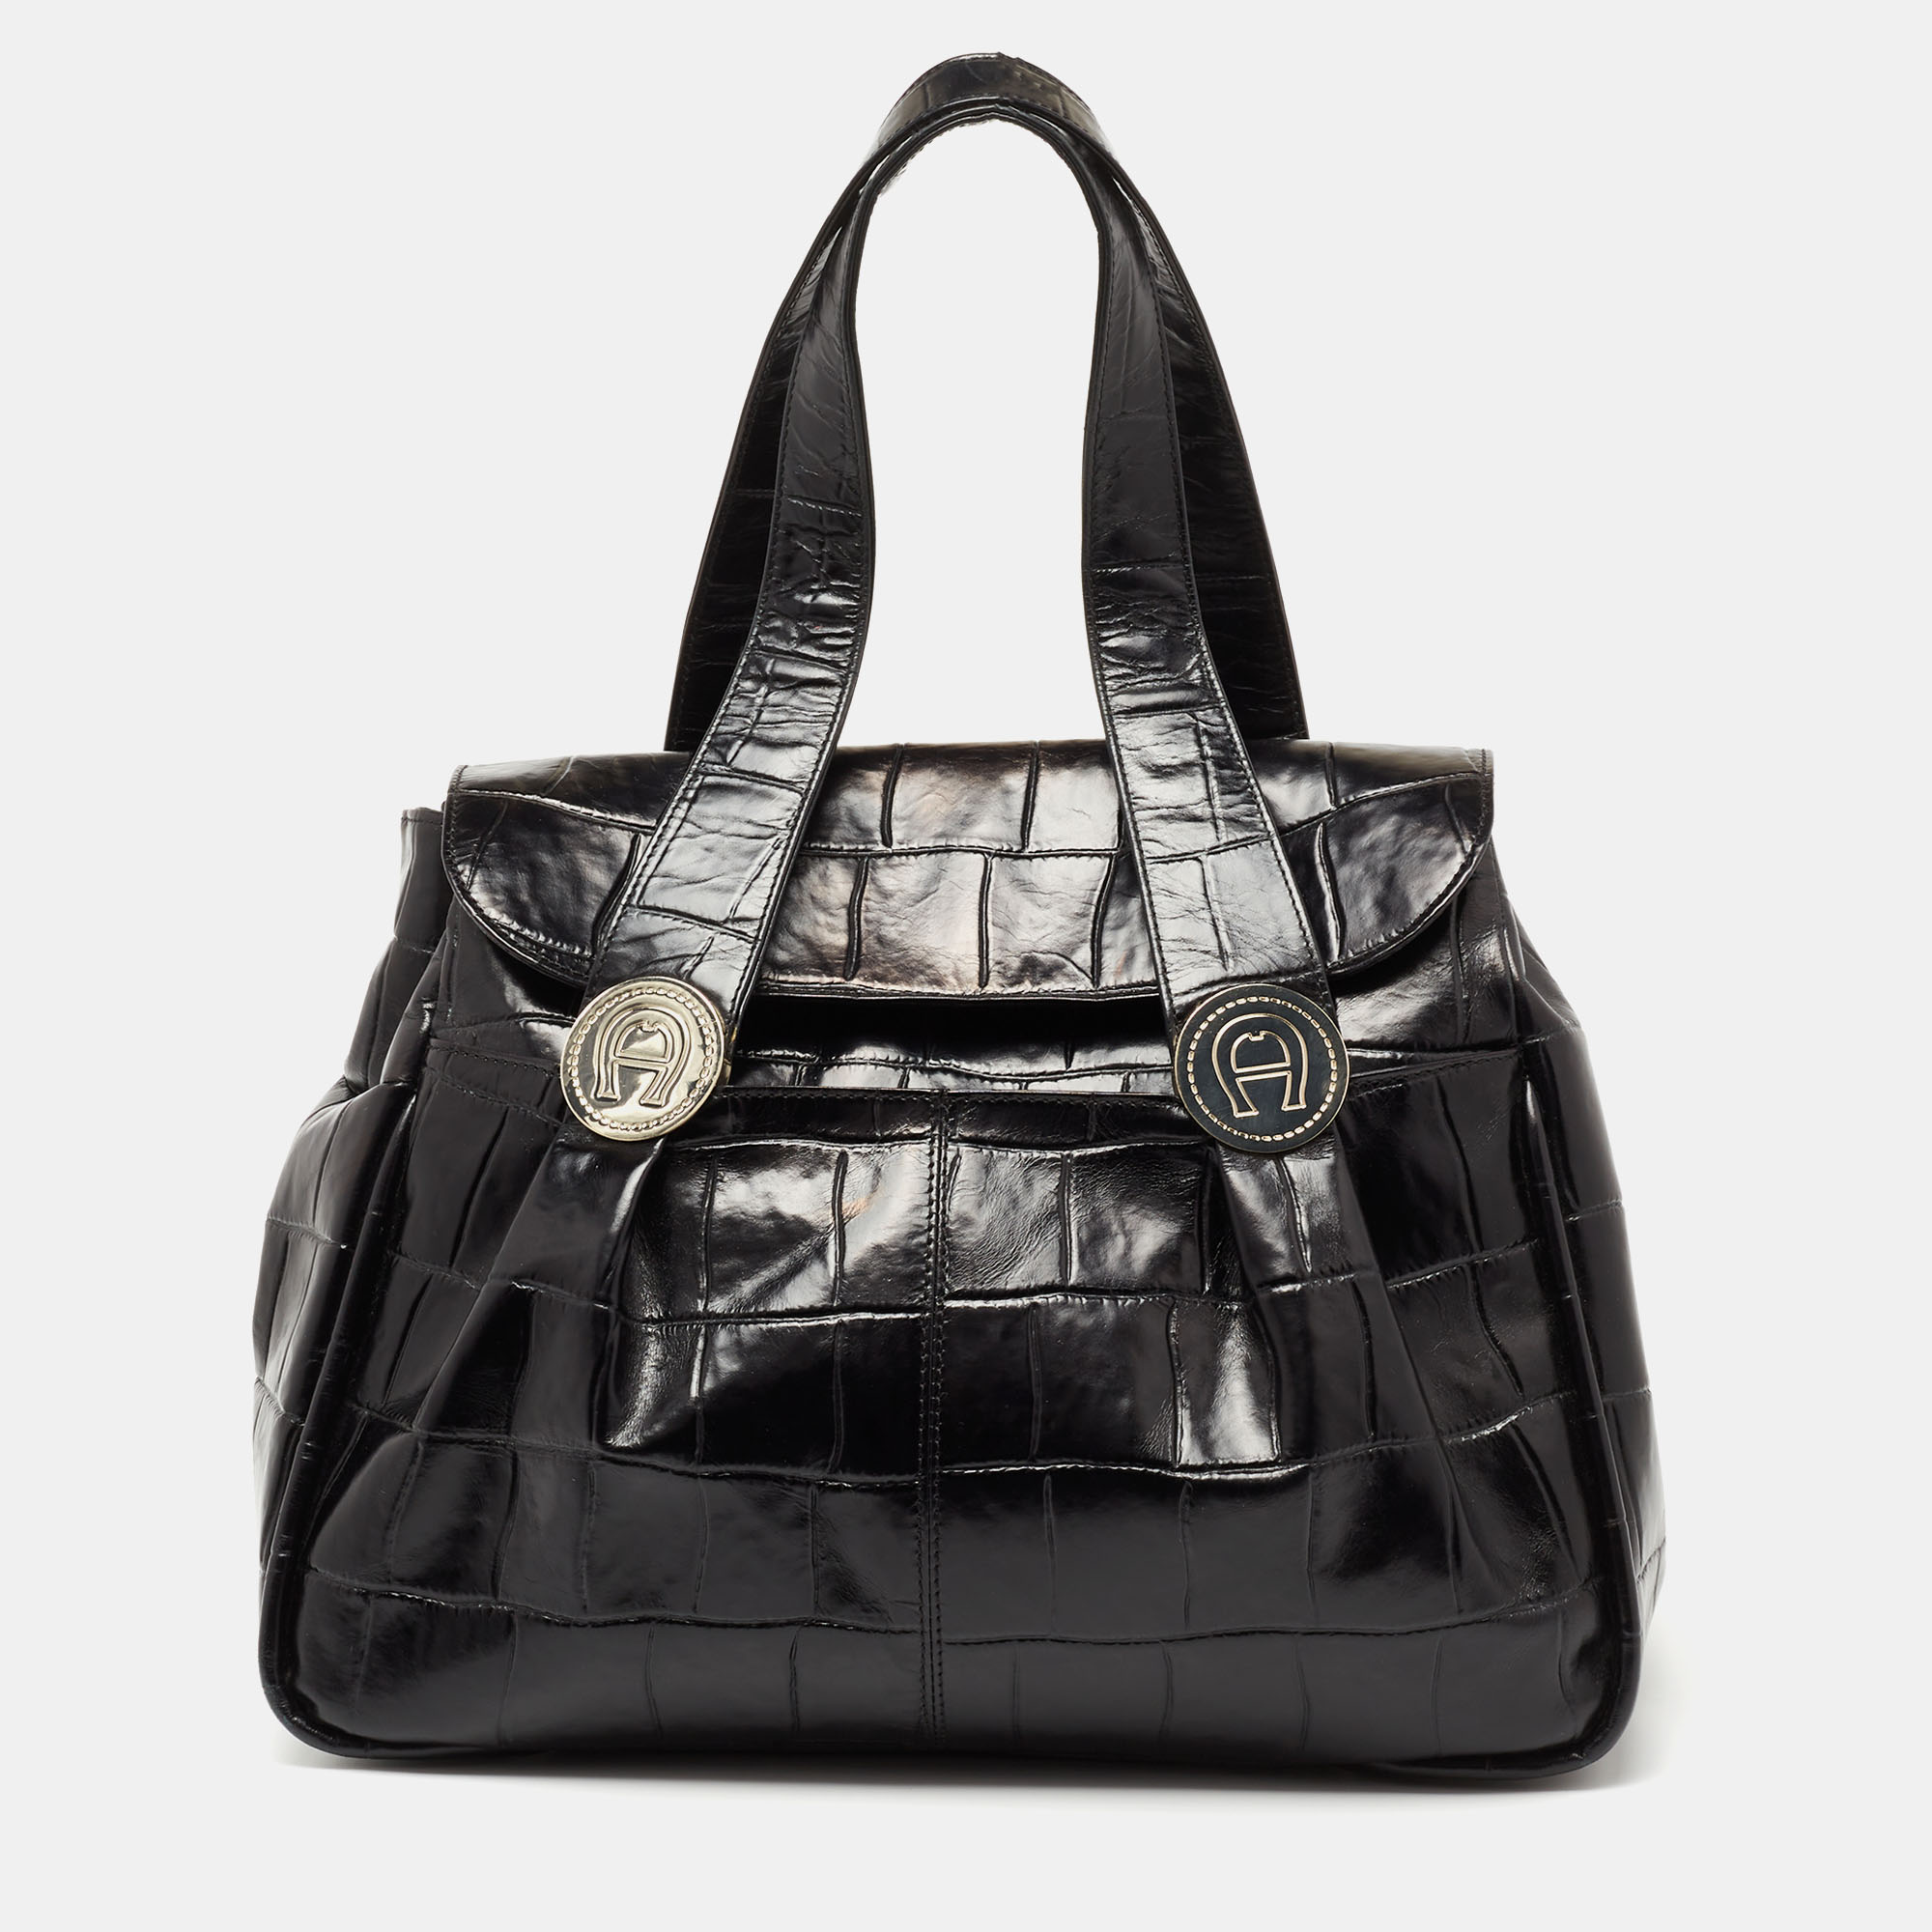 The contemporary design of this Aigner bag makes it worth every penny. Crafted from croc embossed leather it features branded motifs attached to the dual handles and gold tone hardware. Its spacious fabric lined interior comes equipped with a zipper pocket to house your essentials of every shape and size.